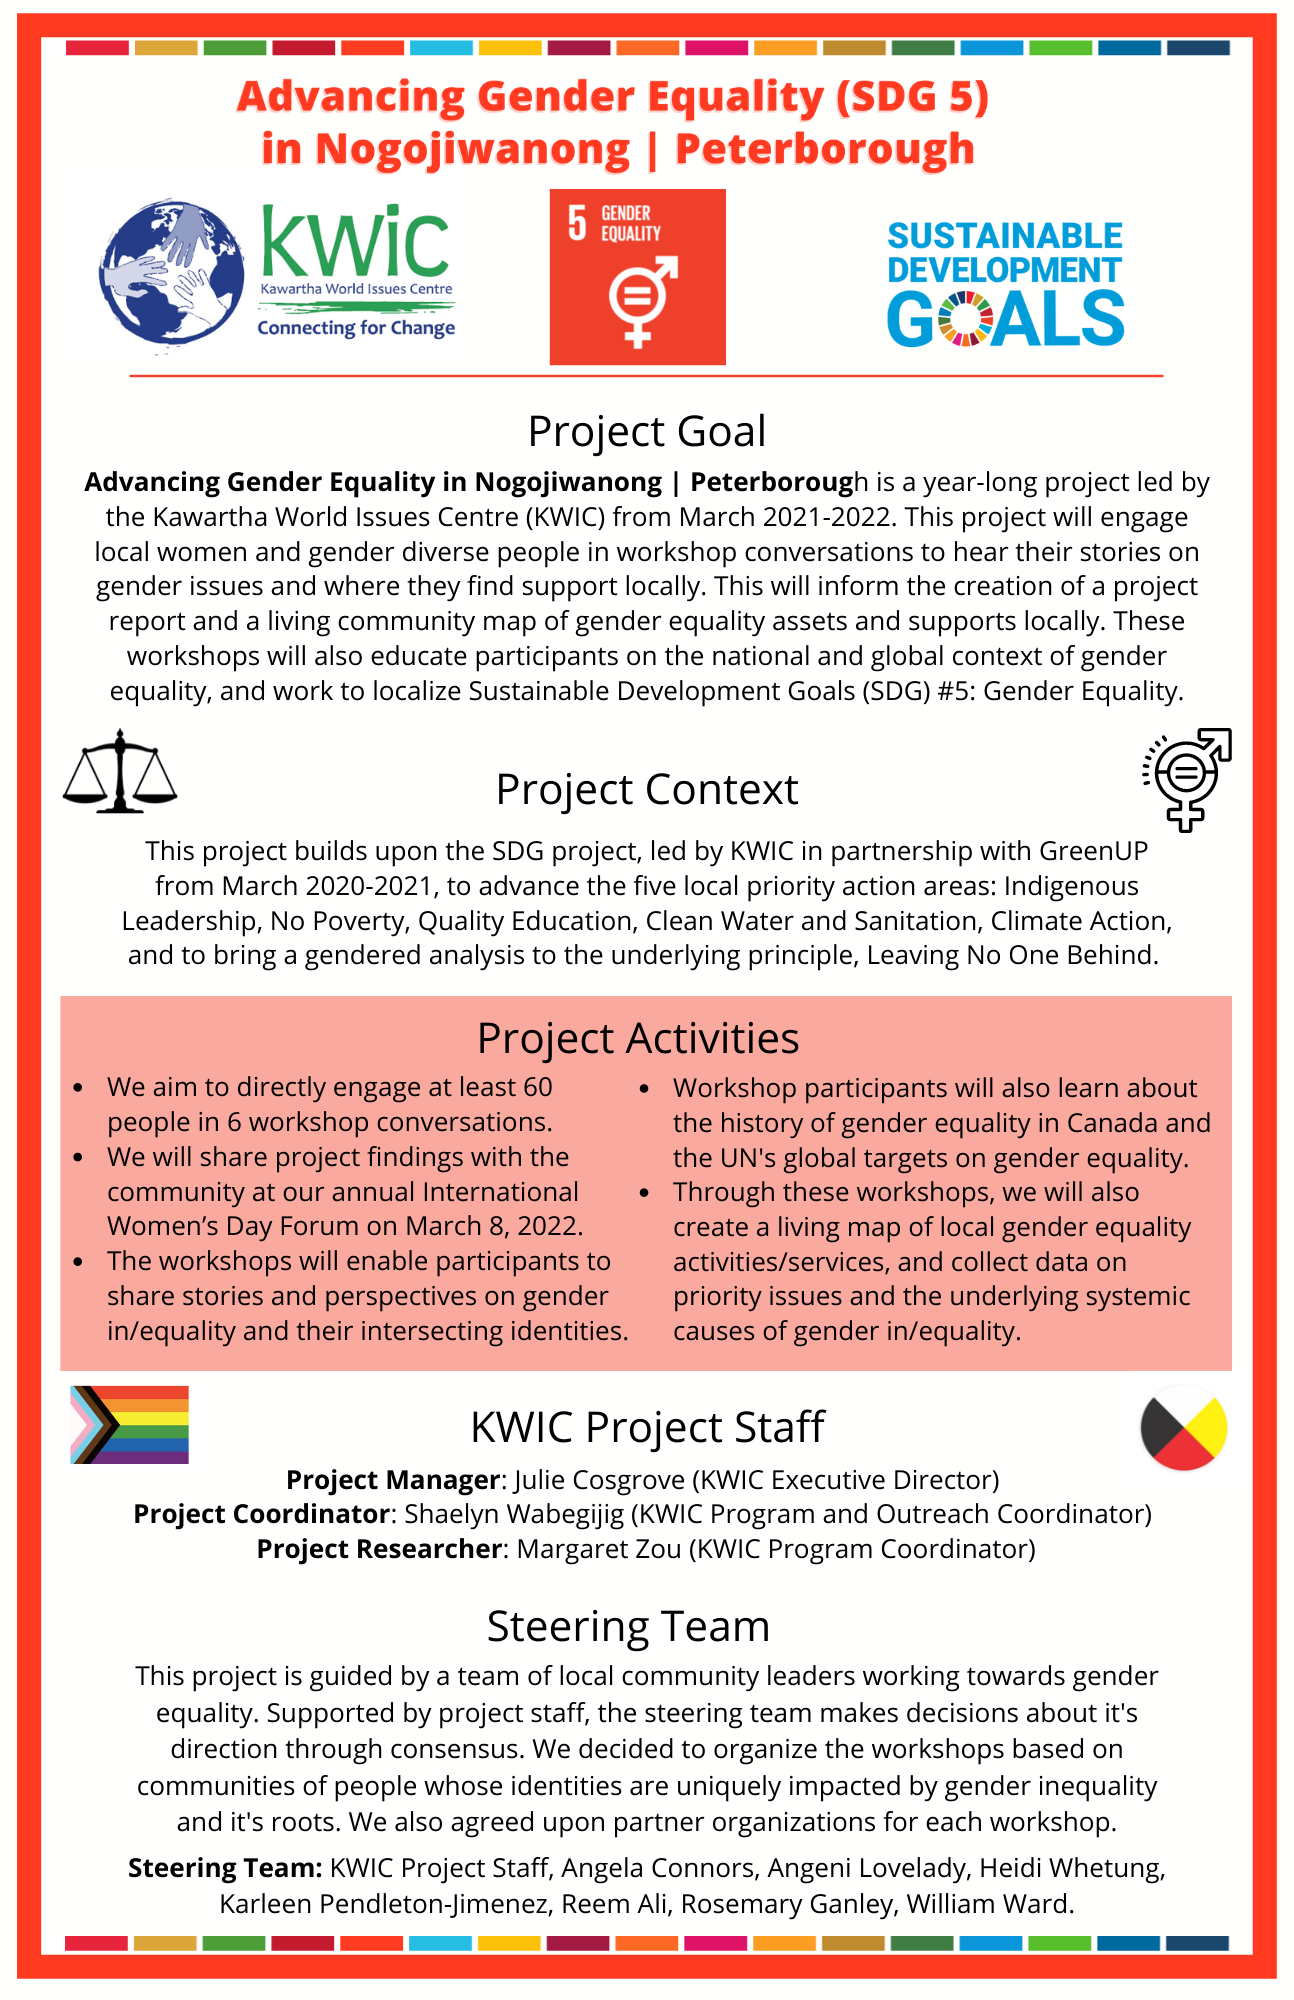 Project Goal; Project Context; Project Activities; KWIC Project Staff; Steering Team.